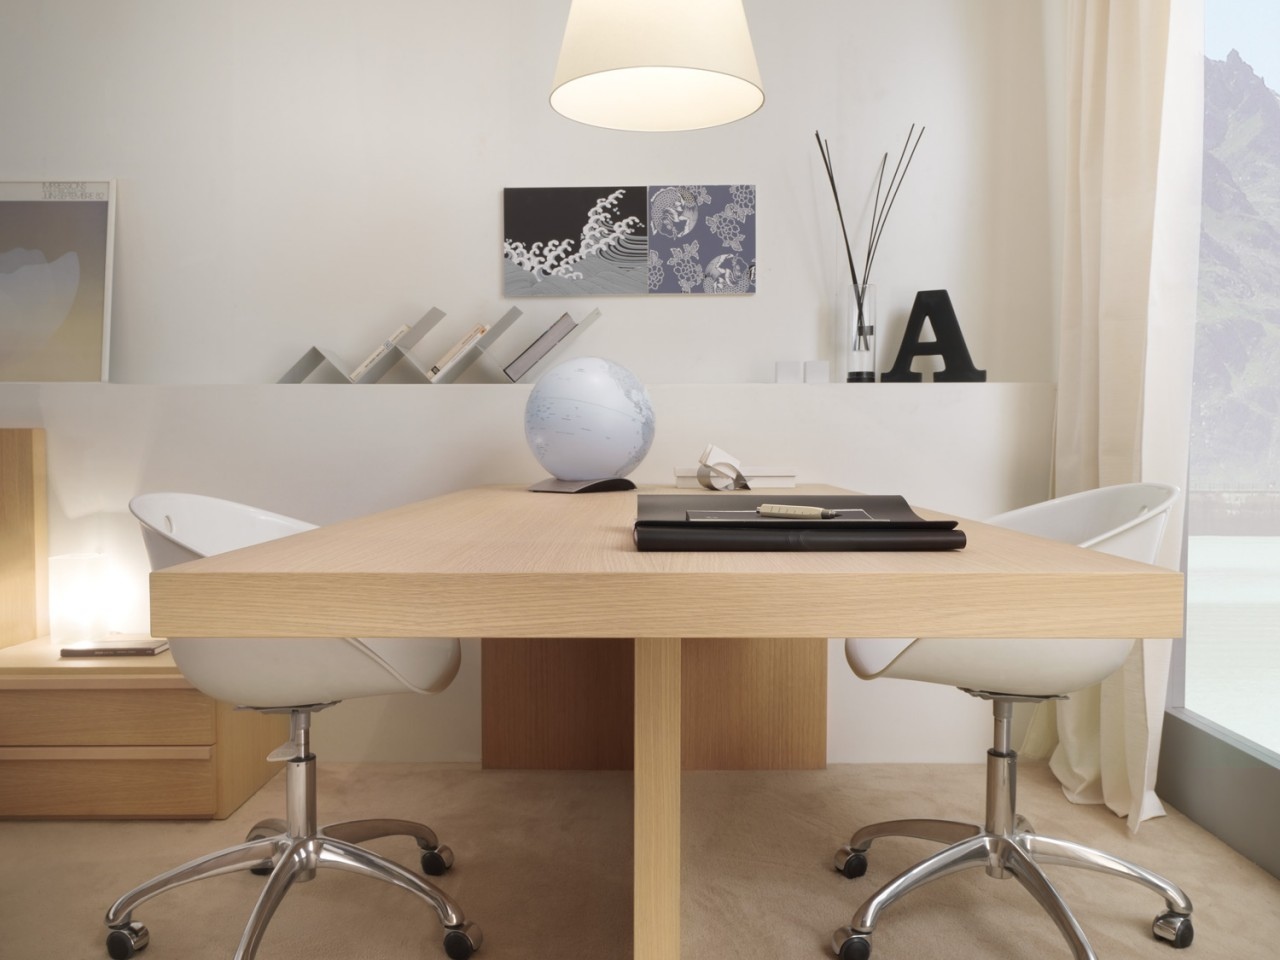 Creative desk "width =" 1280 "height =" 960 "srcset =" https://mileray.com/wp-content/uploads/2020/05/1588505104_154_Inspirational-Workspace-Design-Makes-Your-Bedroom-Looks-Trendy-and-Awesome.jpeg 1280w, https: // myfashionos .com / wp-content / uploads / 2016/02/6-Dual-user-desk-300x225.jpeg 300w, https://mileray.com/wp-content/uploads/2016/02/6-Dual-user - desk-768x576.jpeg 768w, https://mileray.com/wp-content/uploads/2016/02/6-Dual-user-desk-1024x768.jpeg 1024w, https://mileray.com/wp-content / uploads / 2016/02/6-Dual-user-desk-80x60.jpeg 80w, https://mileray.com/wp-content/uploads/2016/02/6-Dual-user-desk-265x198.jpeg 265w, https://mileray.com/wp-content/uploads/2016/02/6-Dual-user-desk-696x522.jpeg 696w, https://mileray.com/wp-content/uploads/2016/02/ 6 -Dual-User-Desk-1068x801.jpeg 1068w, https://mileray.com/wp-content/uploads/2016/02/6-Dual-user-desk-560x420.jpeg 560w "sizes =" (max-width : 1280px) 100vw, 1280px